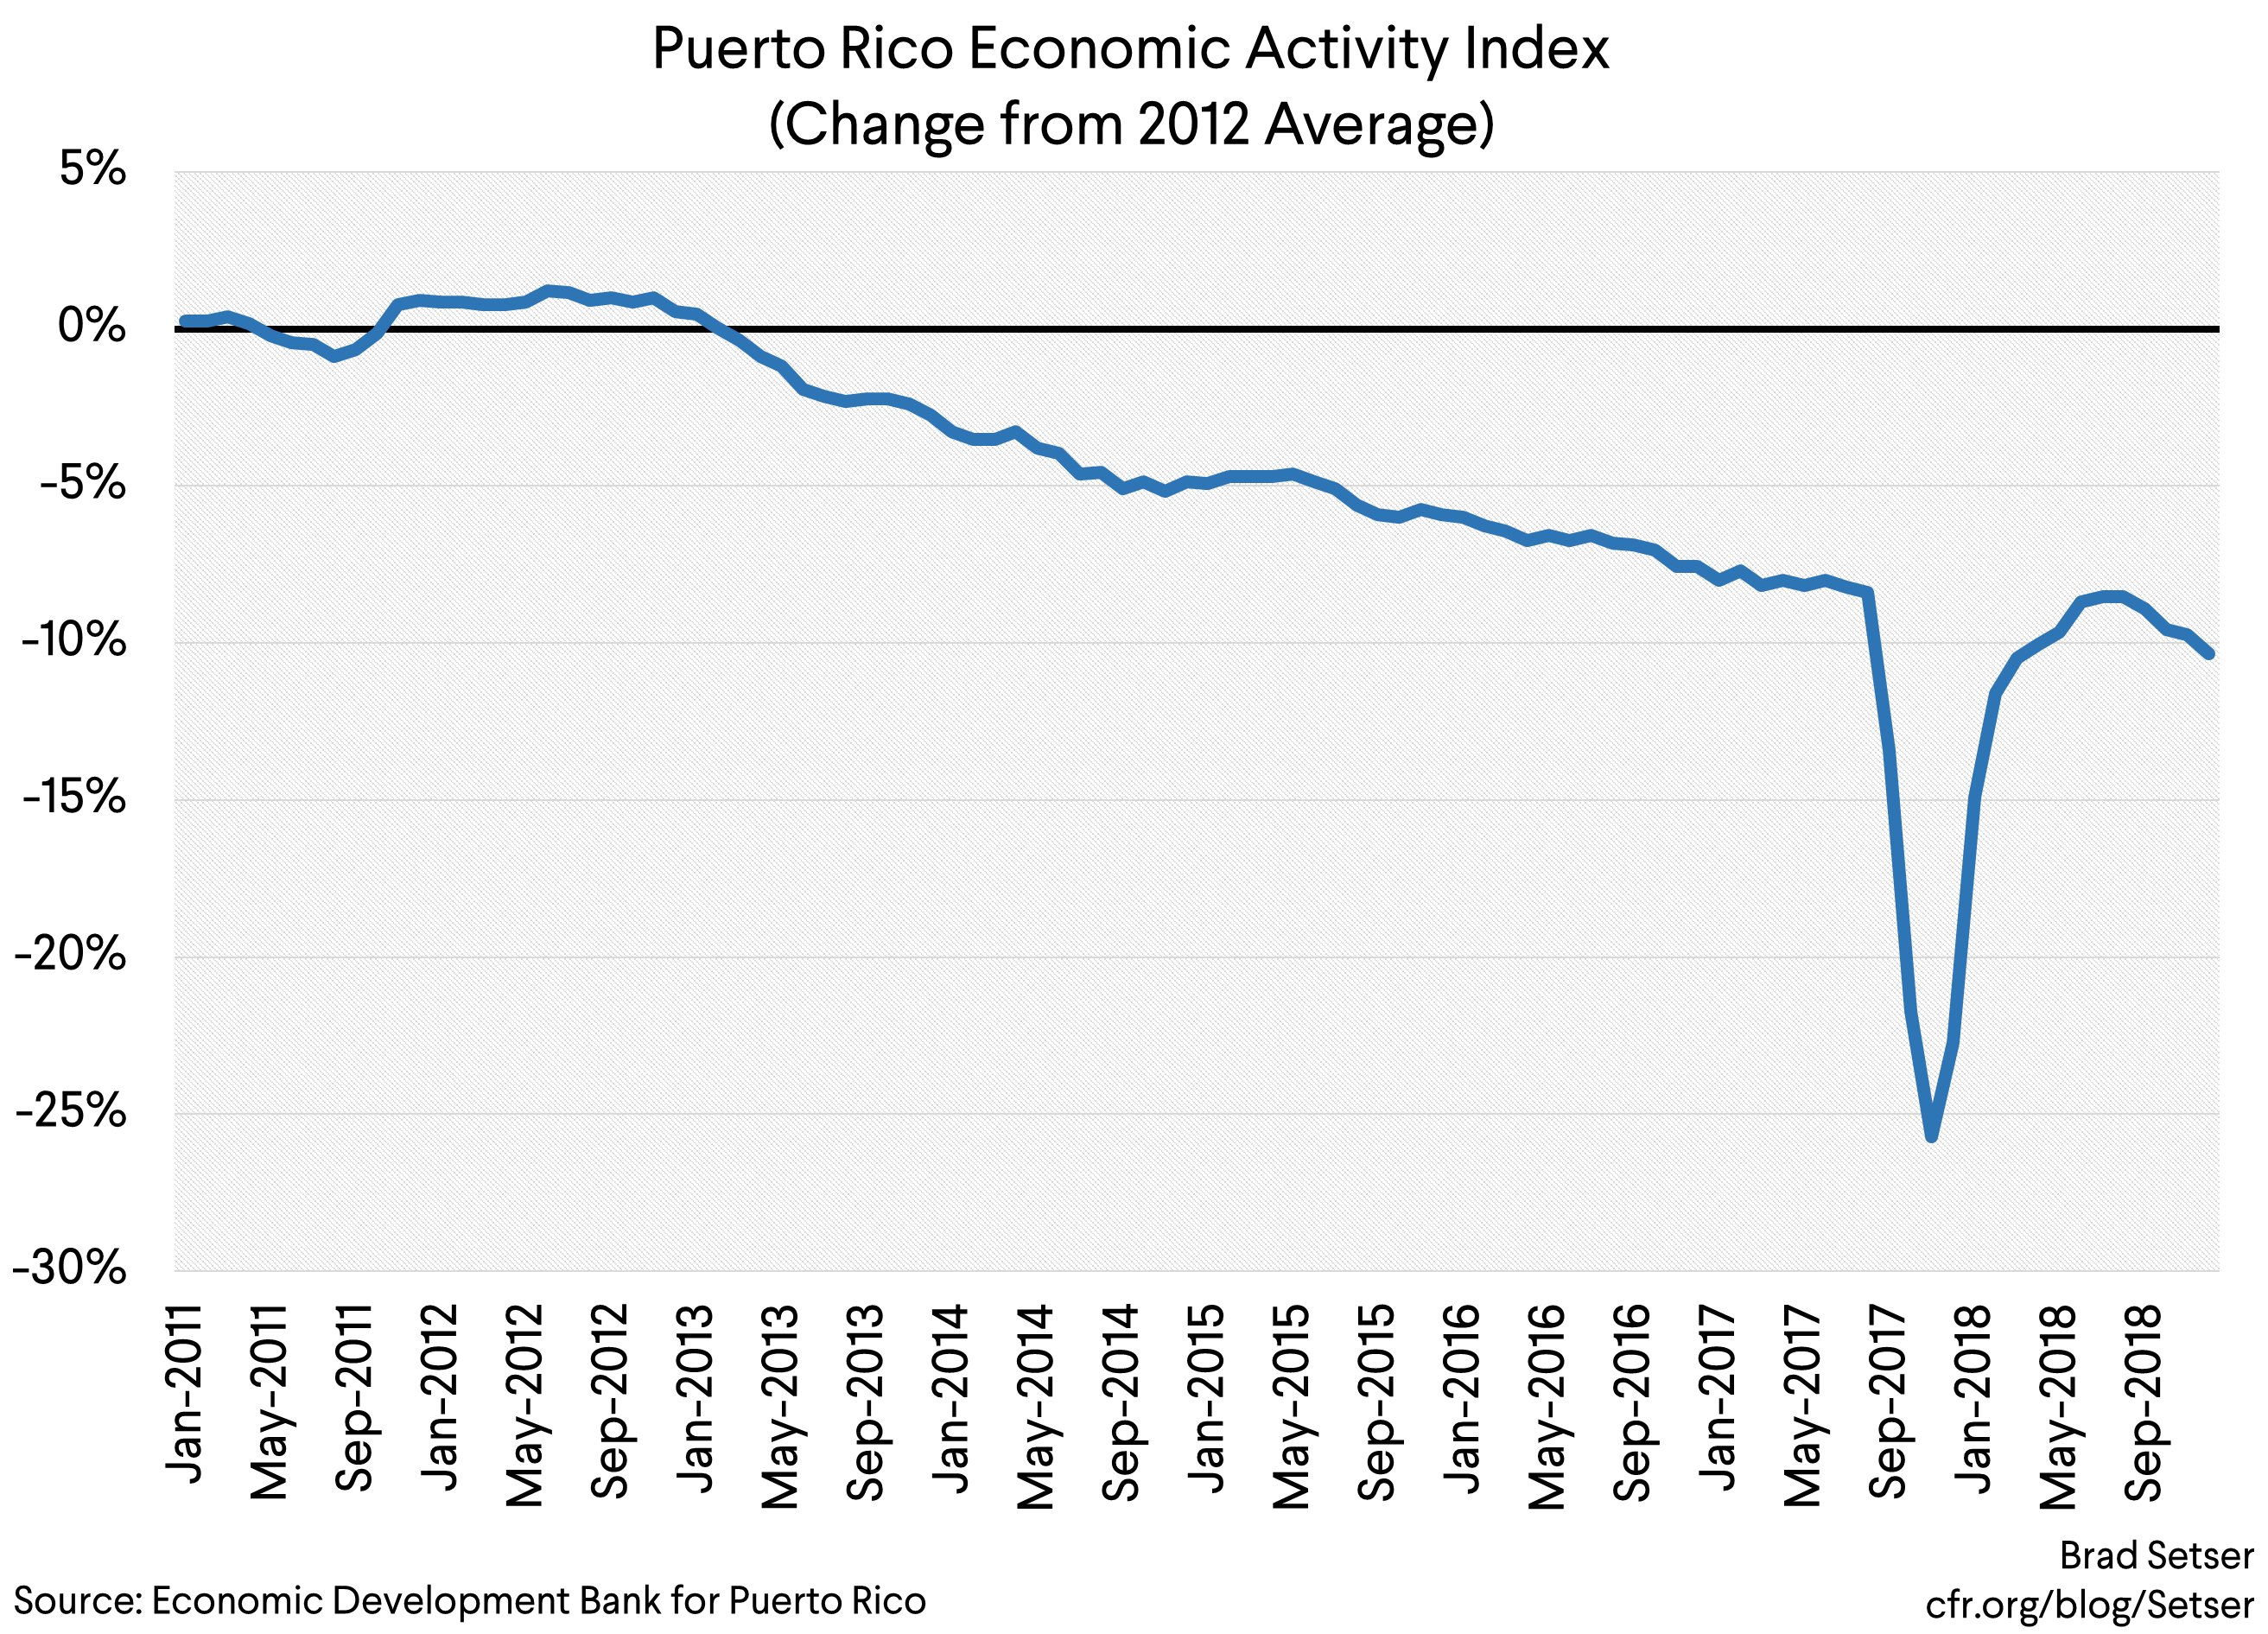 Is There Still A Path that Returns Puerto Rico to Debt Sustainability?